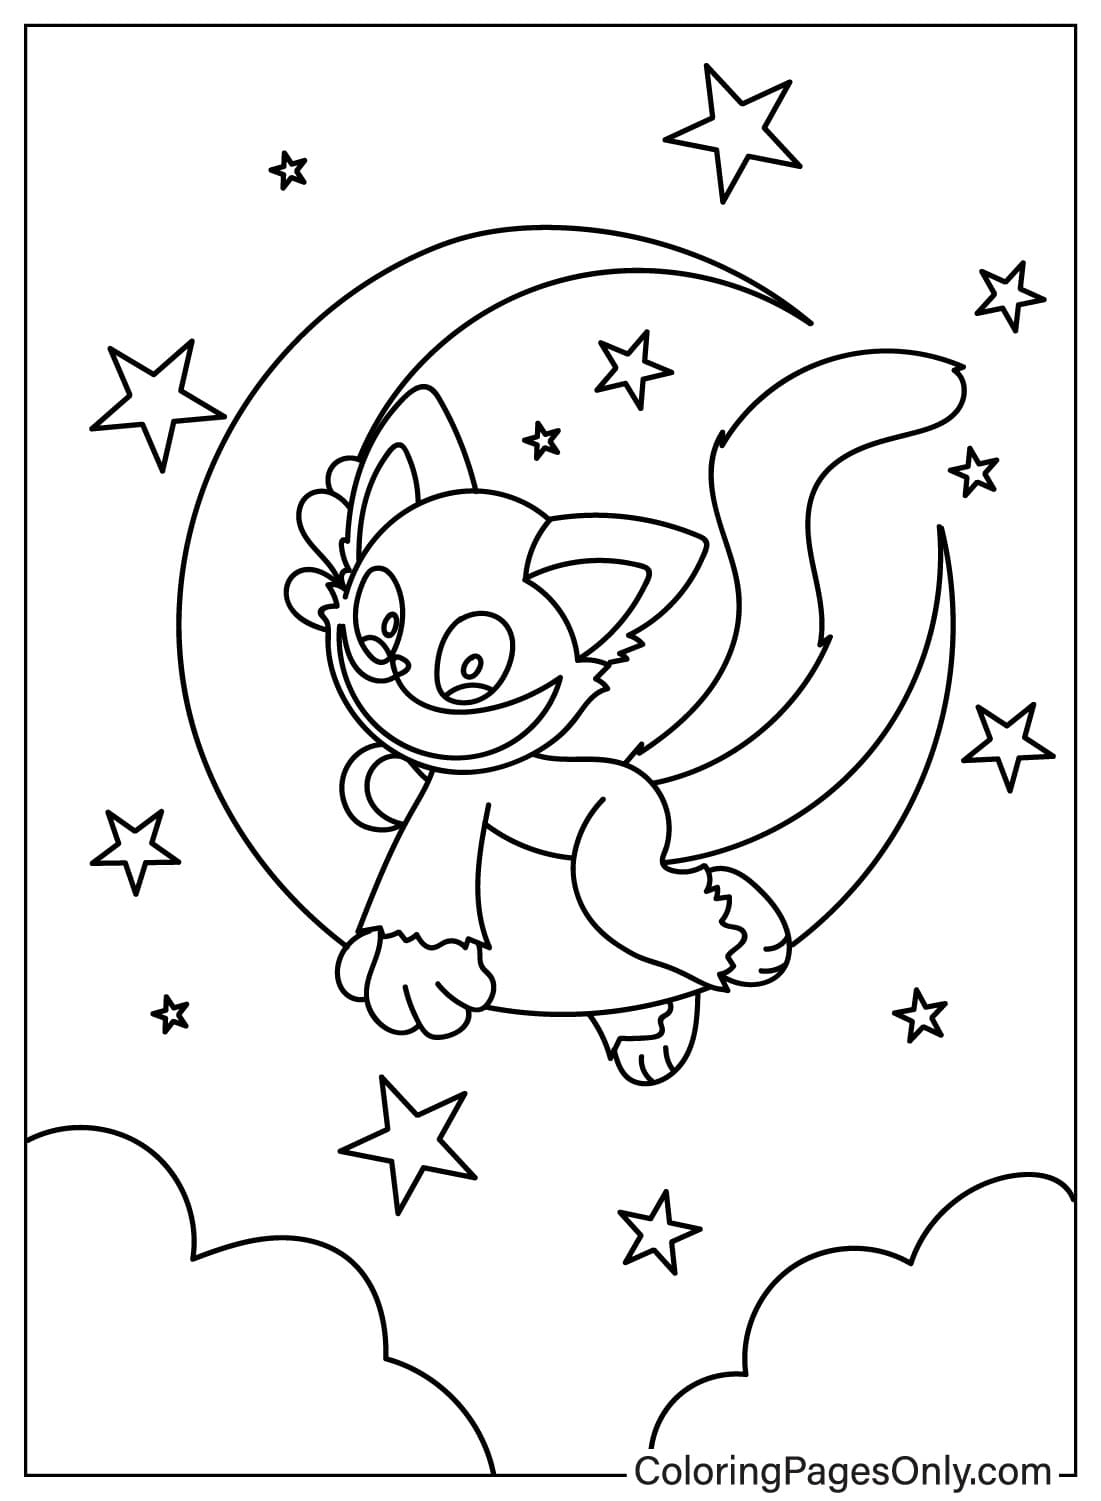 Cute CatNap Coloring Page from CatNap